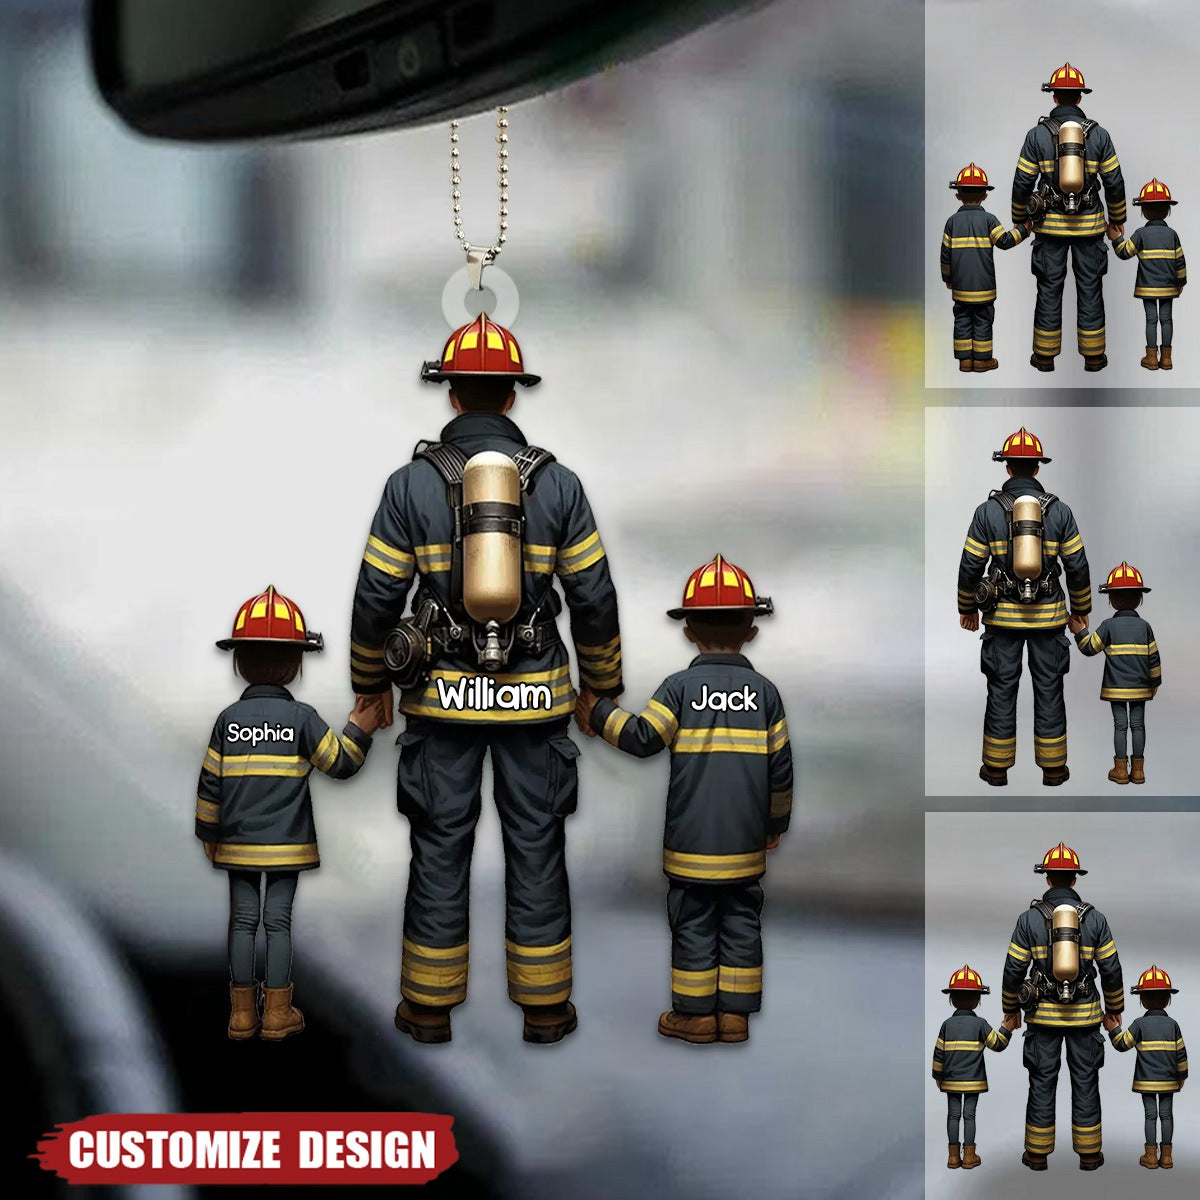 Firefighter Dad And Kids - Personalized Acrylic Car Ornament